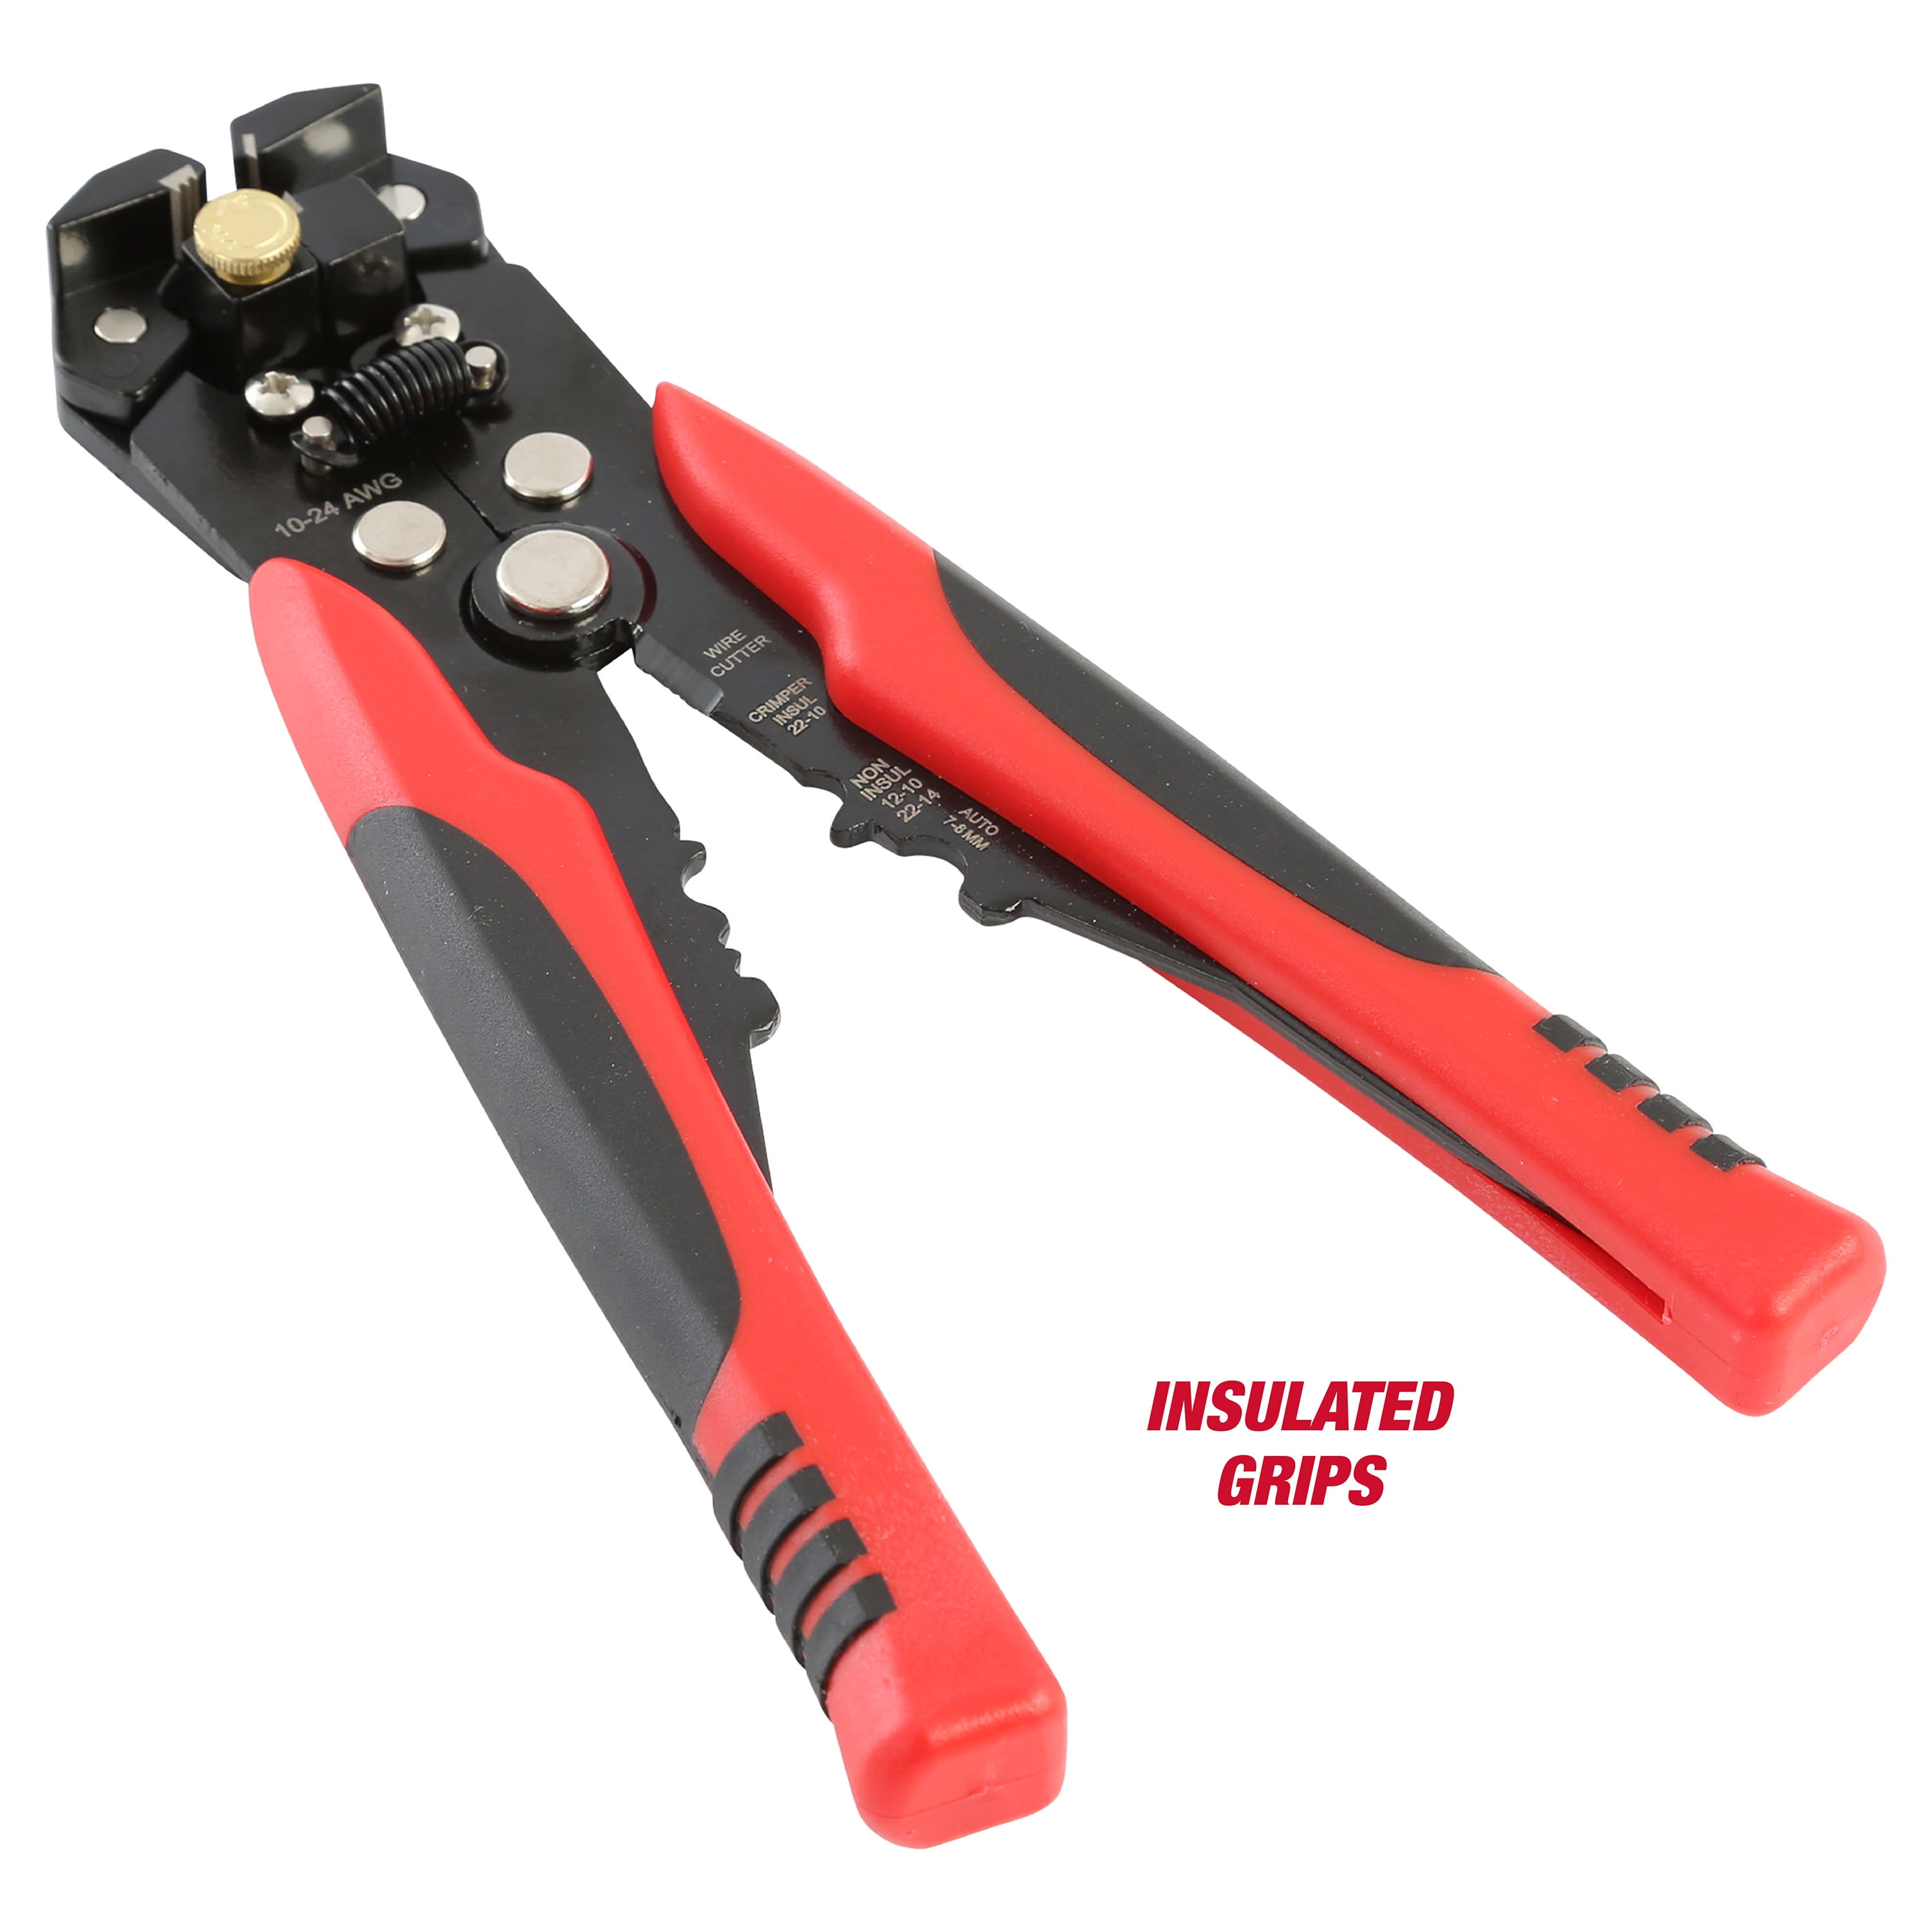 Hart Wire Stripper 10-20 AWG Wire Comfort Grip Handle - Each